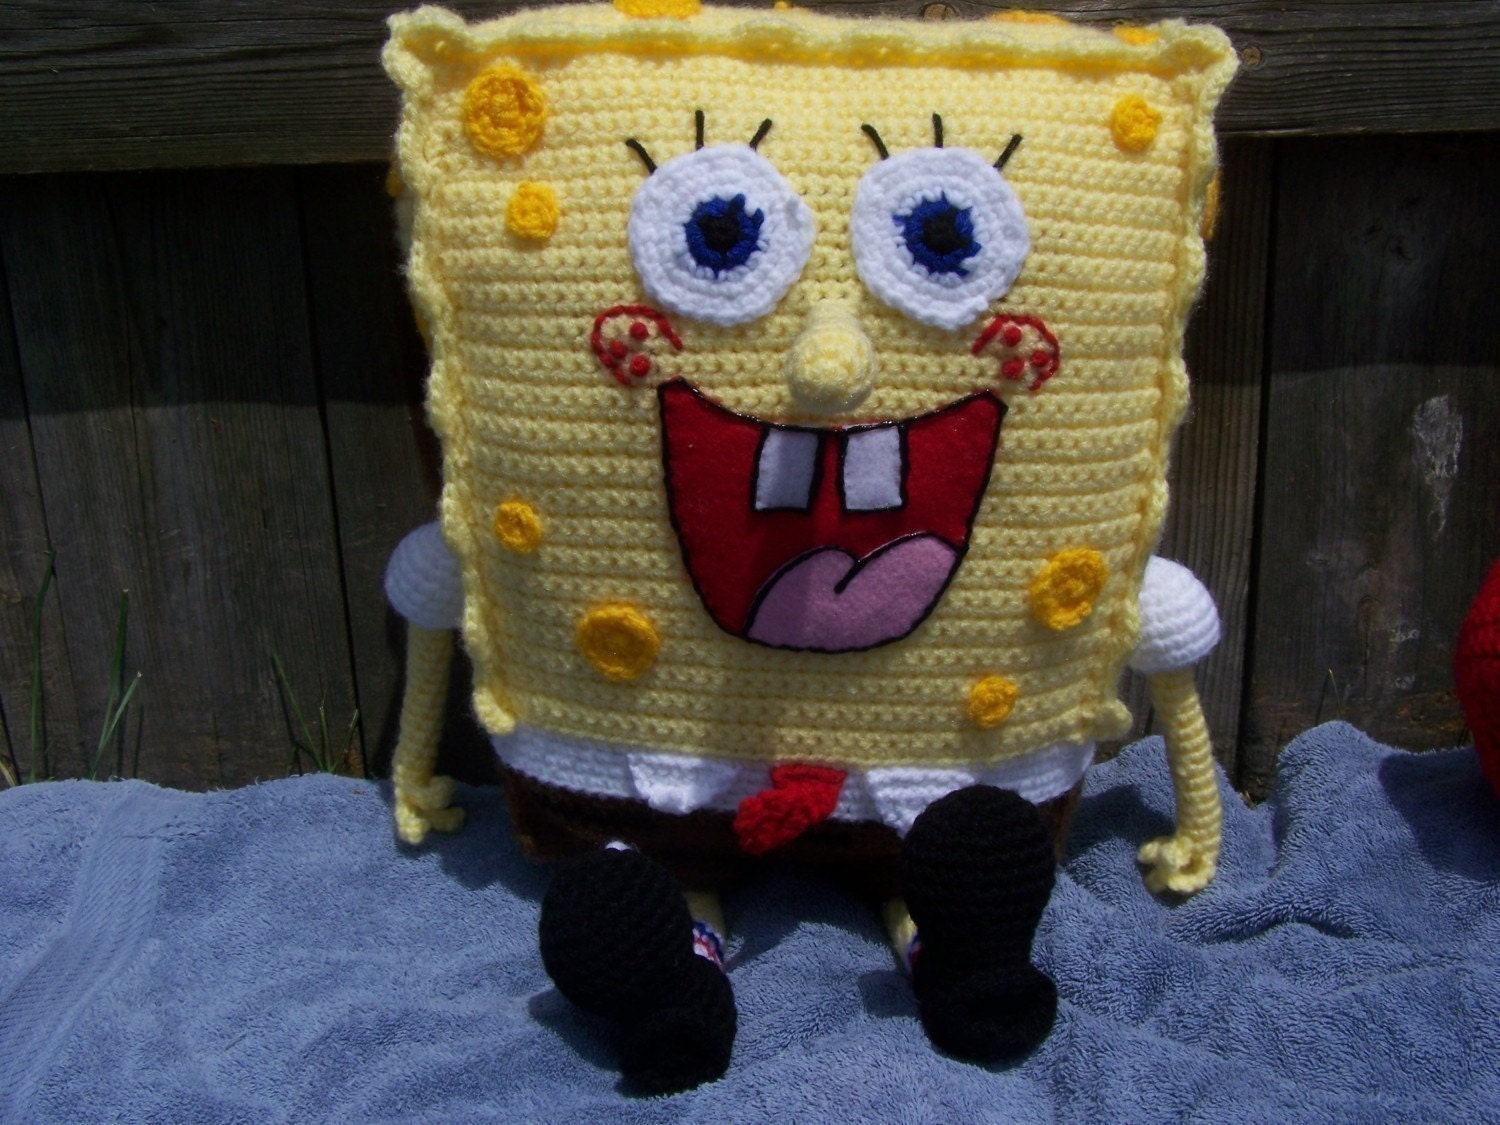 Spongebob Ami Pattern with free Plankton pattern included.